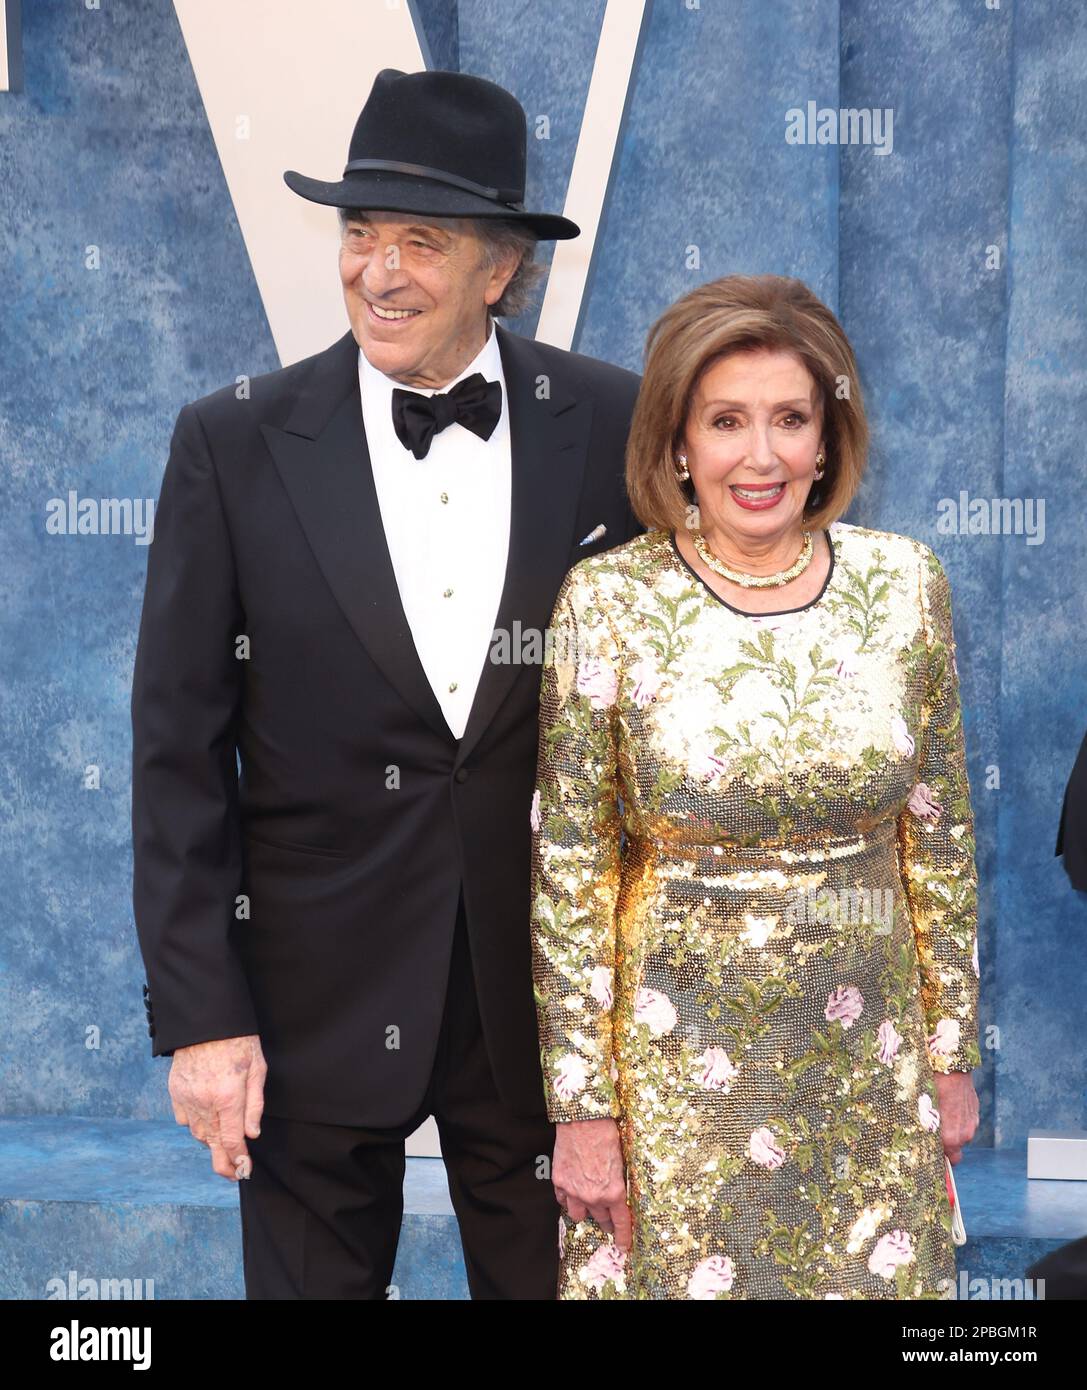 Beverly Hills, USA. 12th Mar, 2023. Paul Pelosi, Nancy Pelosi attend the 2023 Vanity Fair Oscar Party at Wallis Annenberg Center for the Performing Arts on March 12, 2023 in Beverly Hills, California. Photo: CraSH/imageSPACE Credit: Imagespace/Alamy Live News Stock Photo